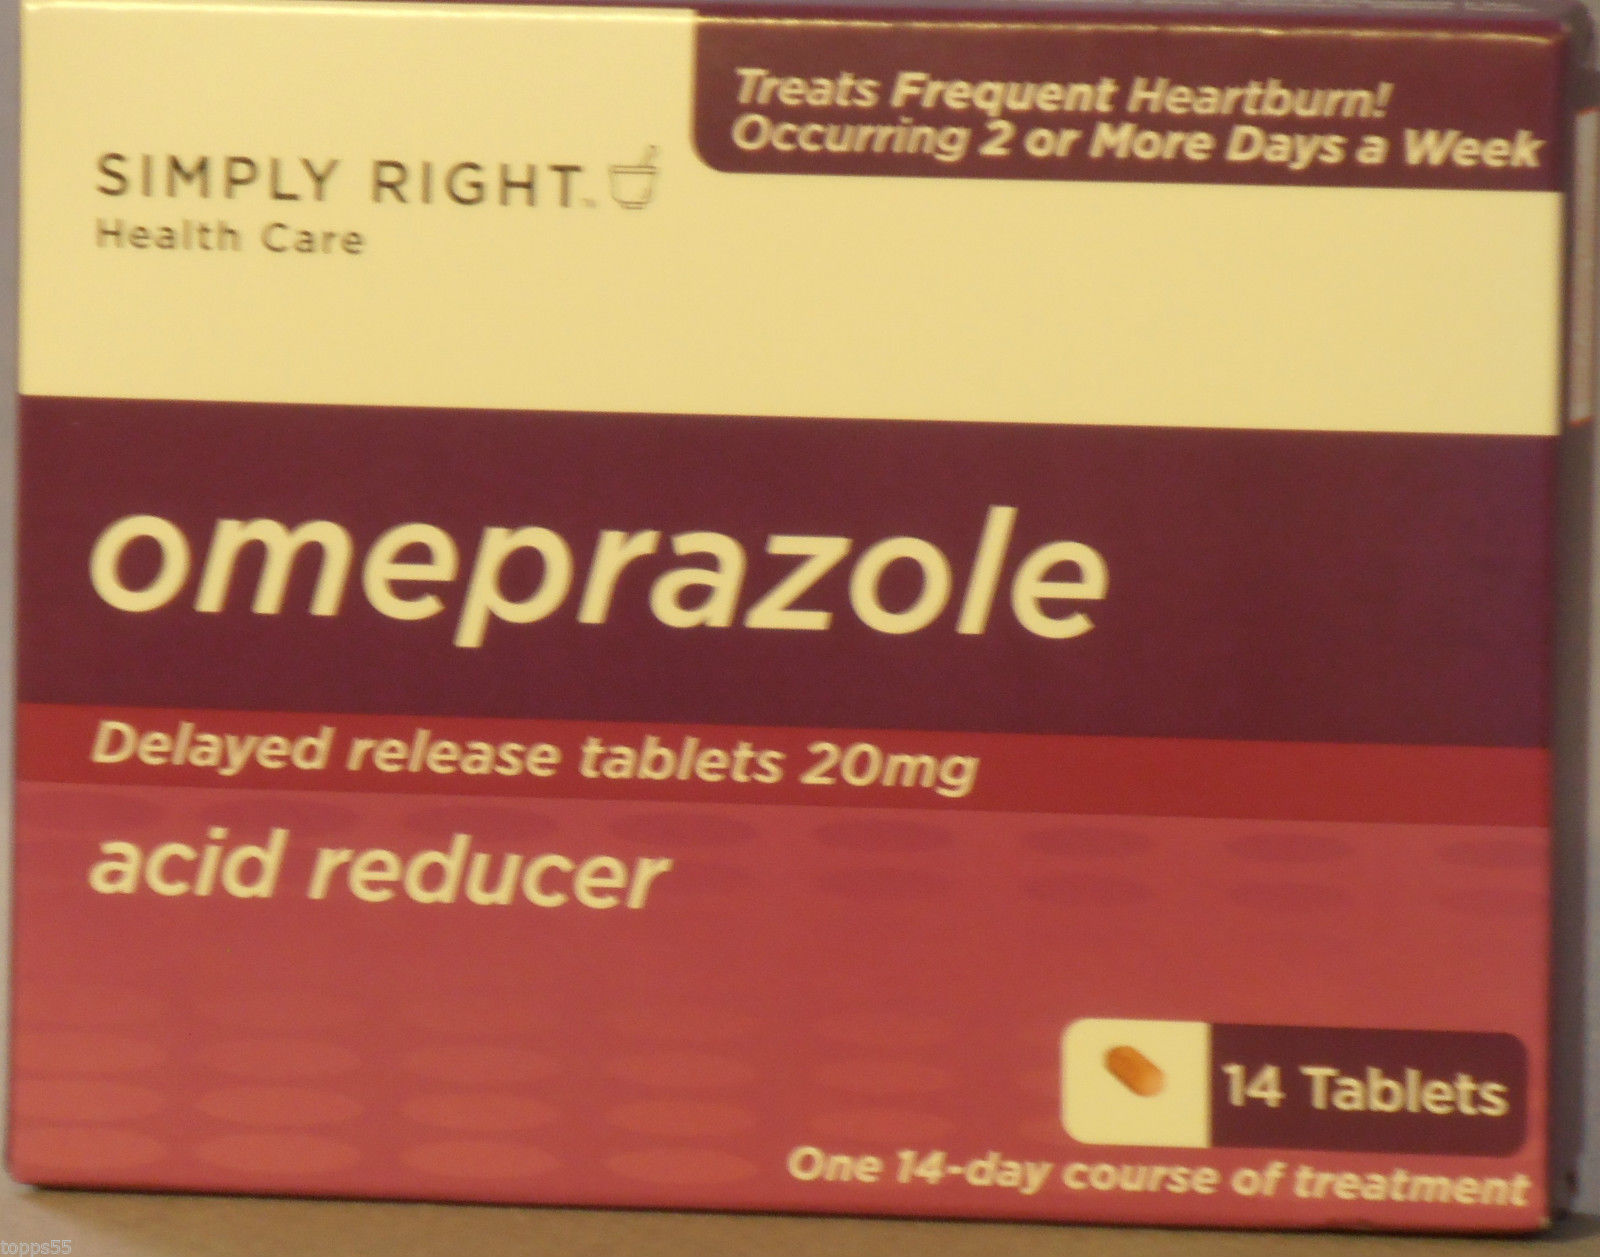 14ct Simply Right Generic Omeprazole OTC Acid Reducer HeartburnTablets 20mg New -- US Delivery